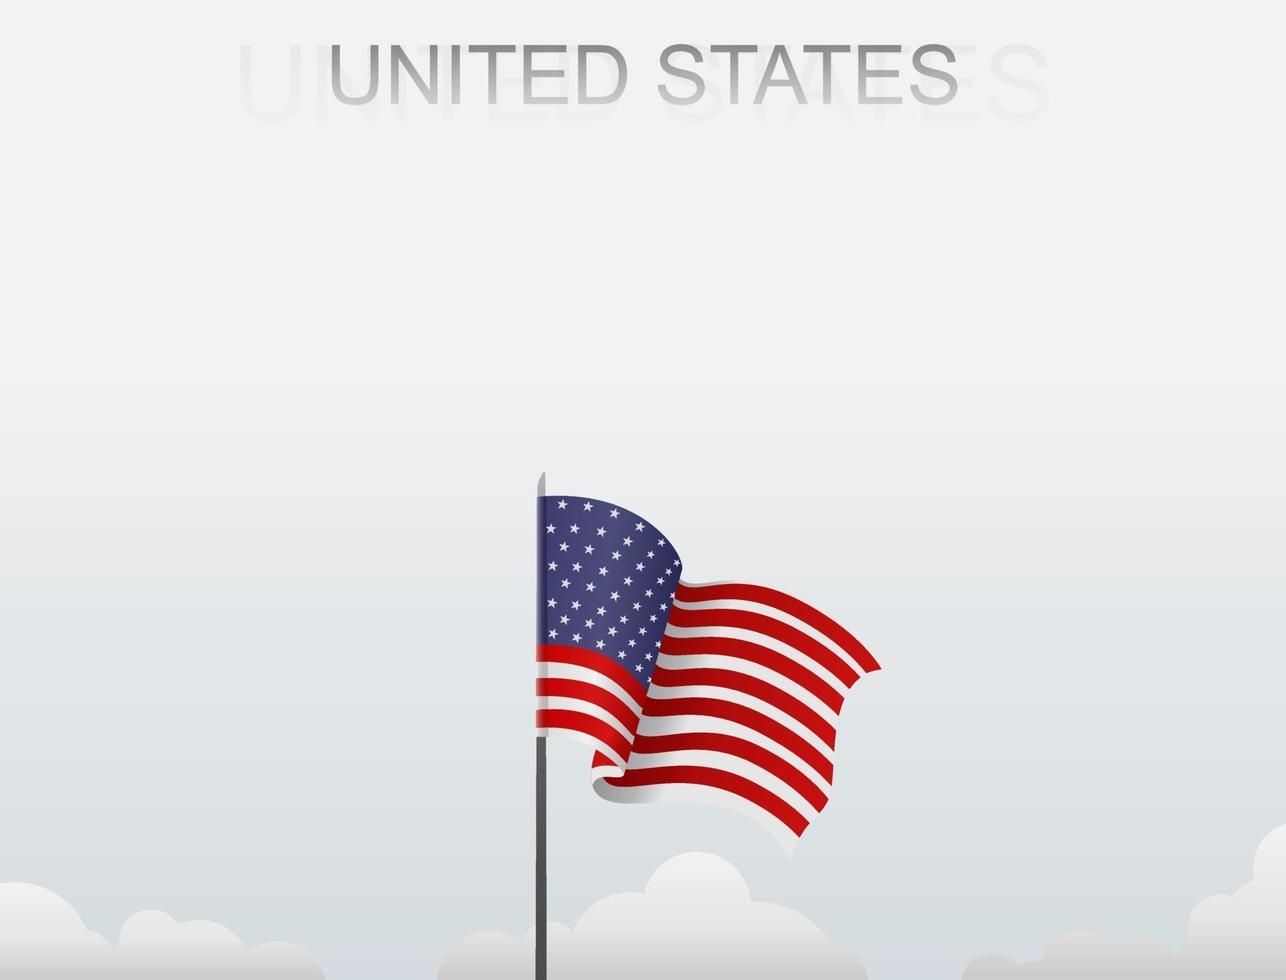 The United States flag is flying on a pole that stands tall under the white sky vector